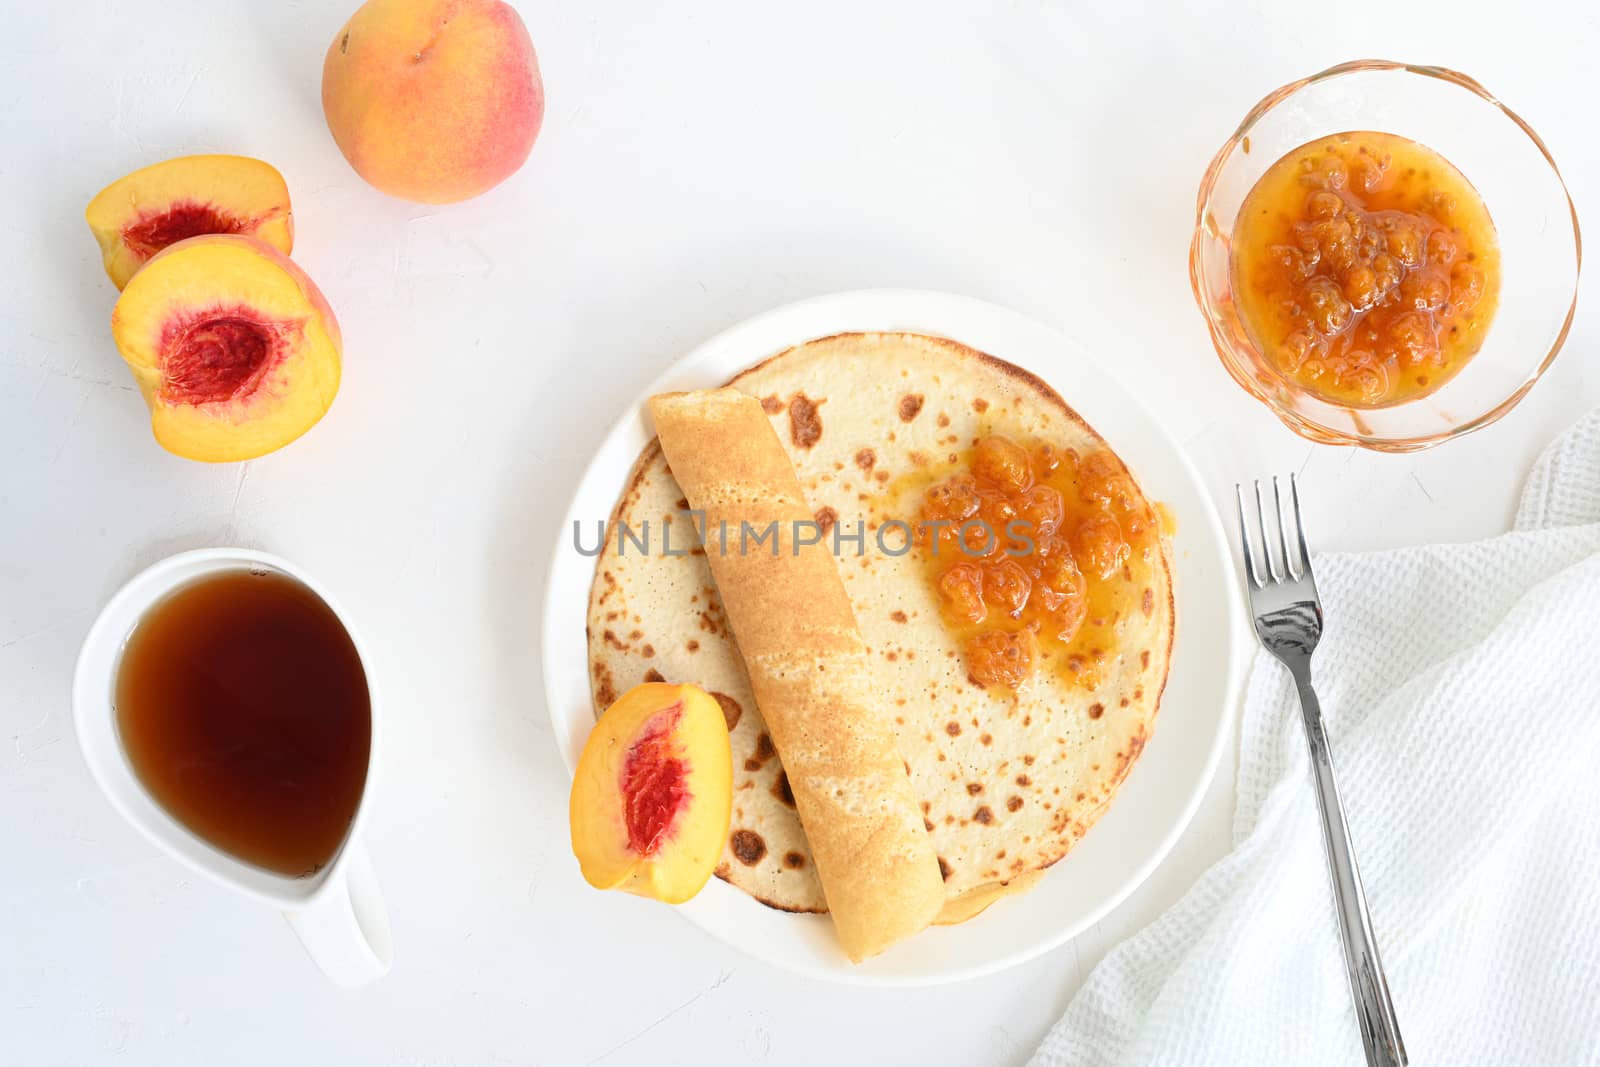 large pancakes with jam, tea and peaches on white background.